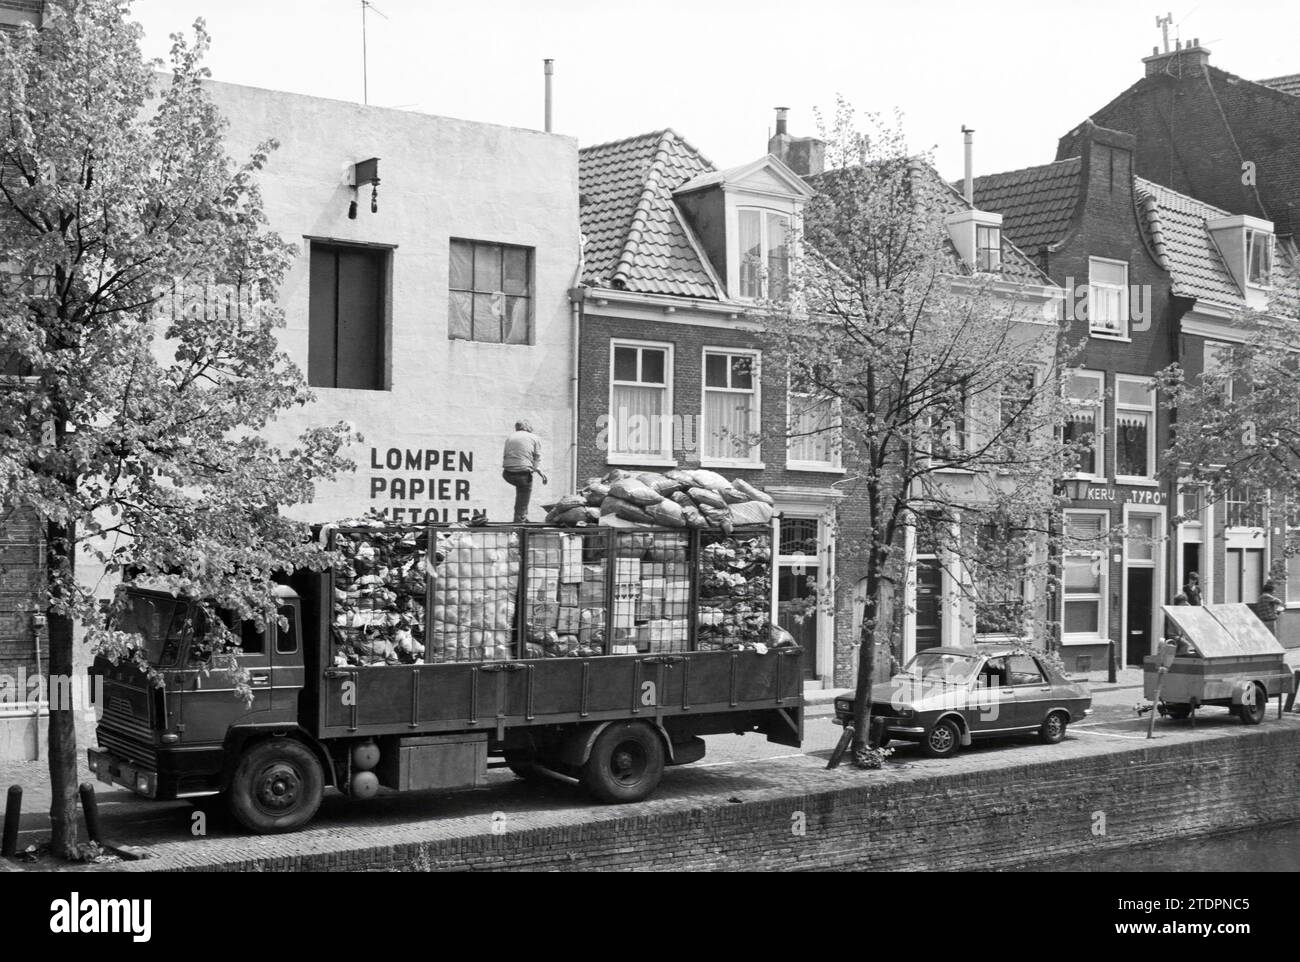 House beauty committee. Bakenessergracht 93 and higher with the wholesale trade in rags, paper and metal at number 93 (later demolished) and the Typo printing company at number 101, Haarlem, Bakenessergracht, The Netherlands, 20-05-1980, Whizgle News from the Past, Tailored for the Future. Explore historical narratives, Dutch The Netherlands agency image with a modern perspective, bridging the gap between yesterday's events and tomorrow's insights. A timeless journey shaping the stories that shape our future Stock Photo